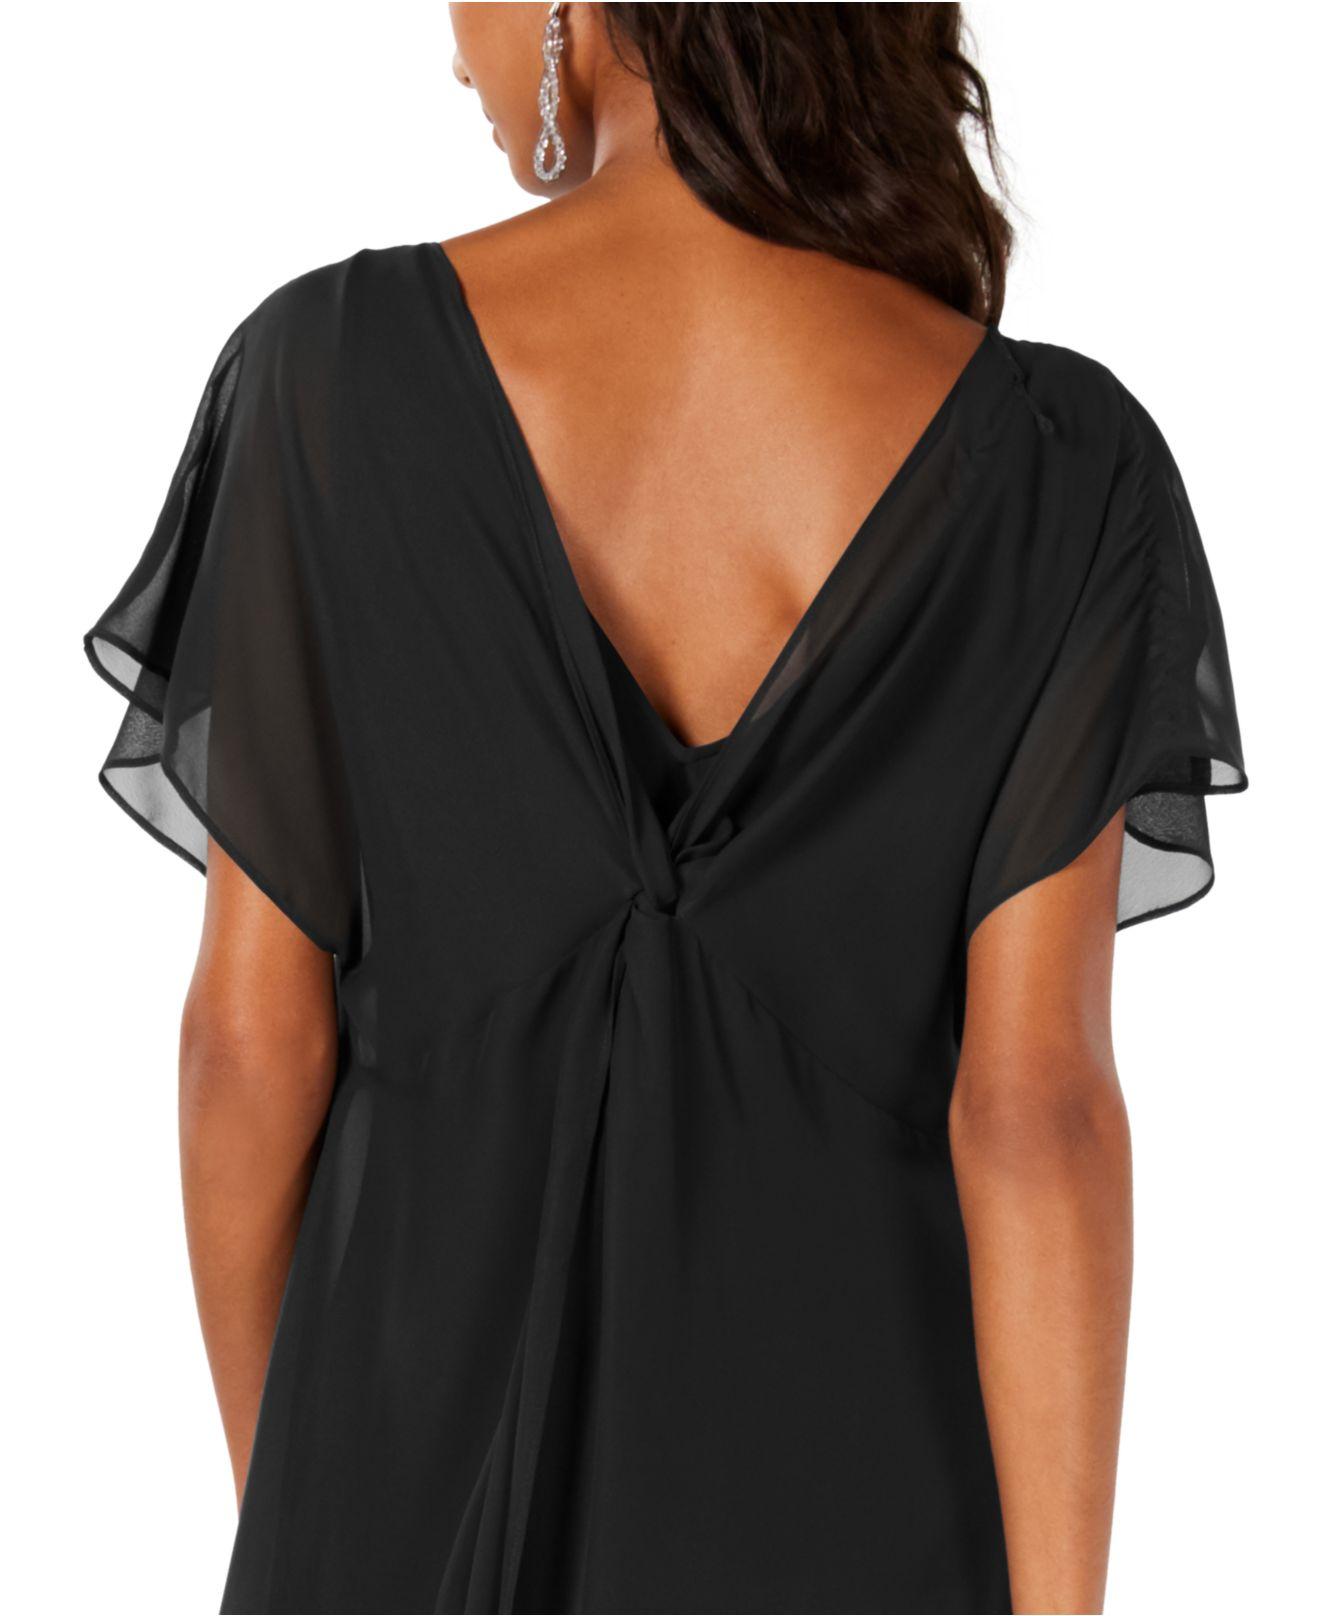 Adrianna Papell Chiffon-overlay A-line Dress in Black - Lyst